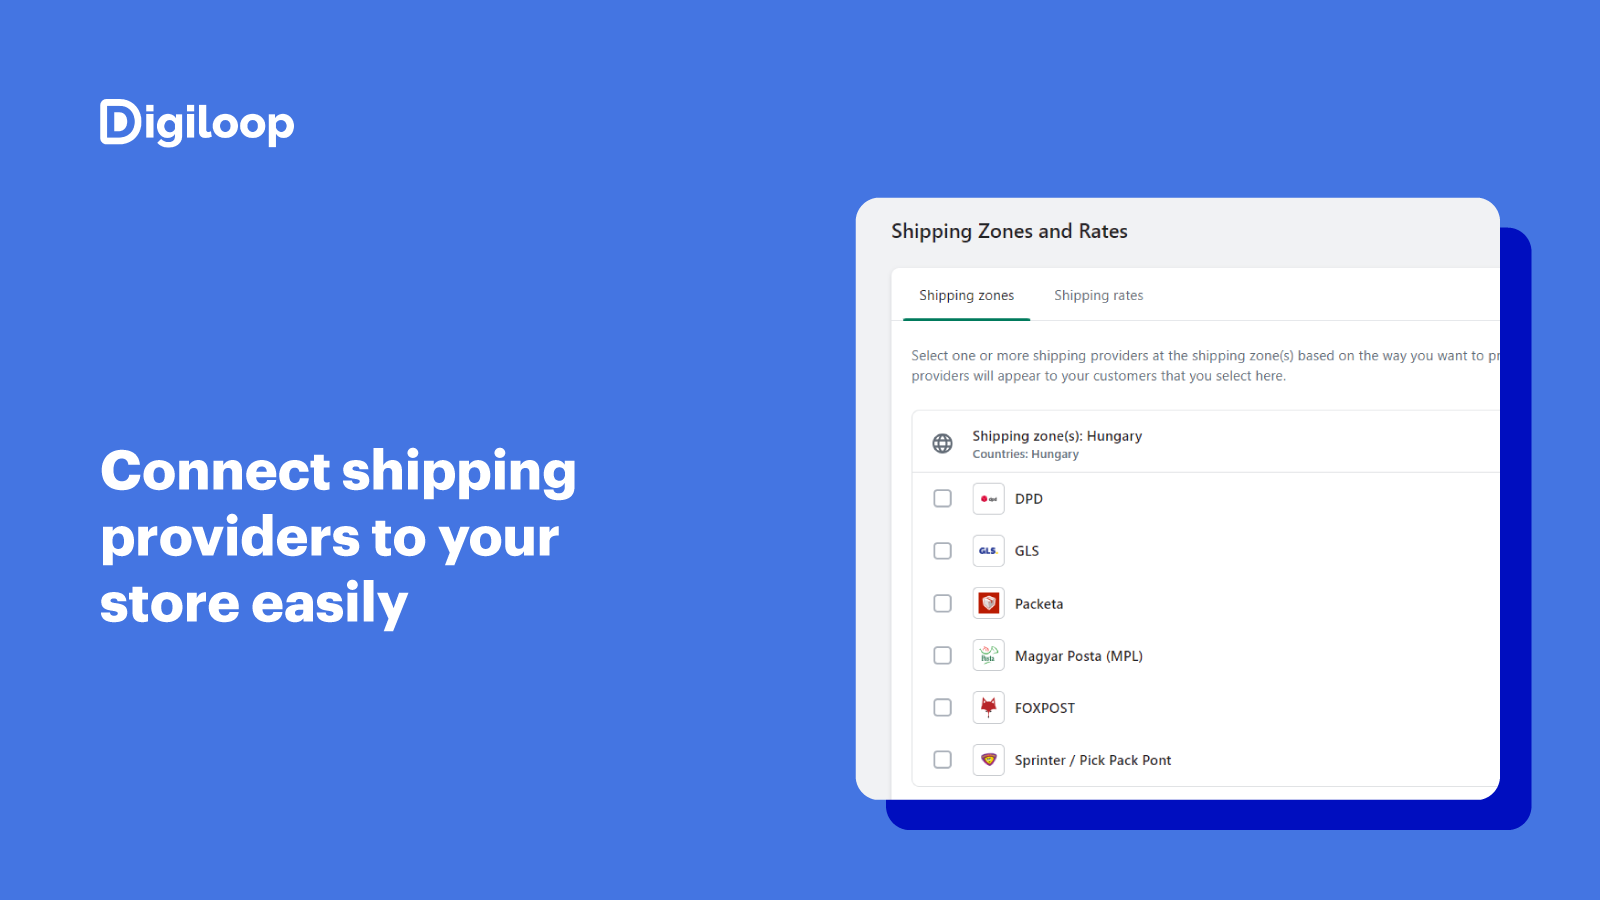 Connect shipping providers to your store easily